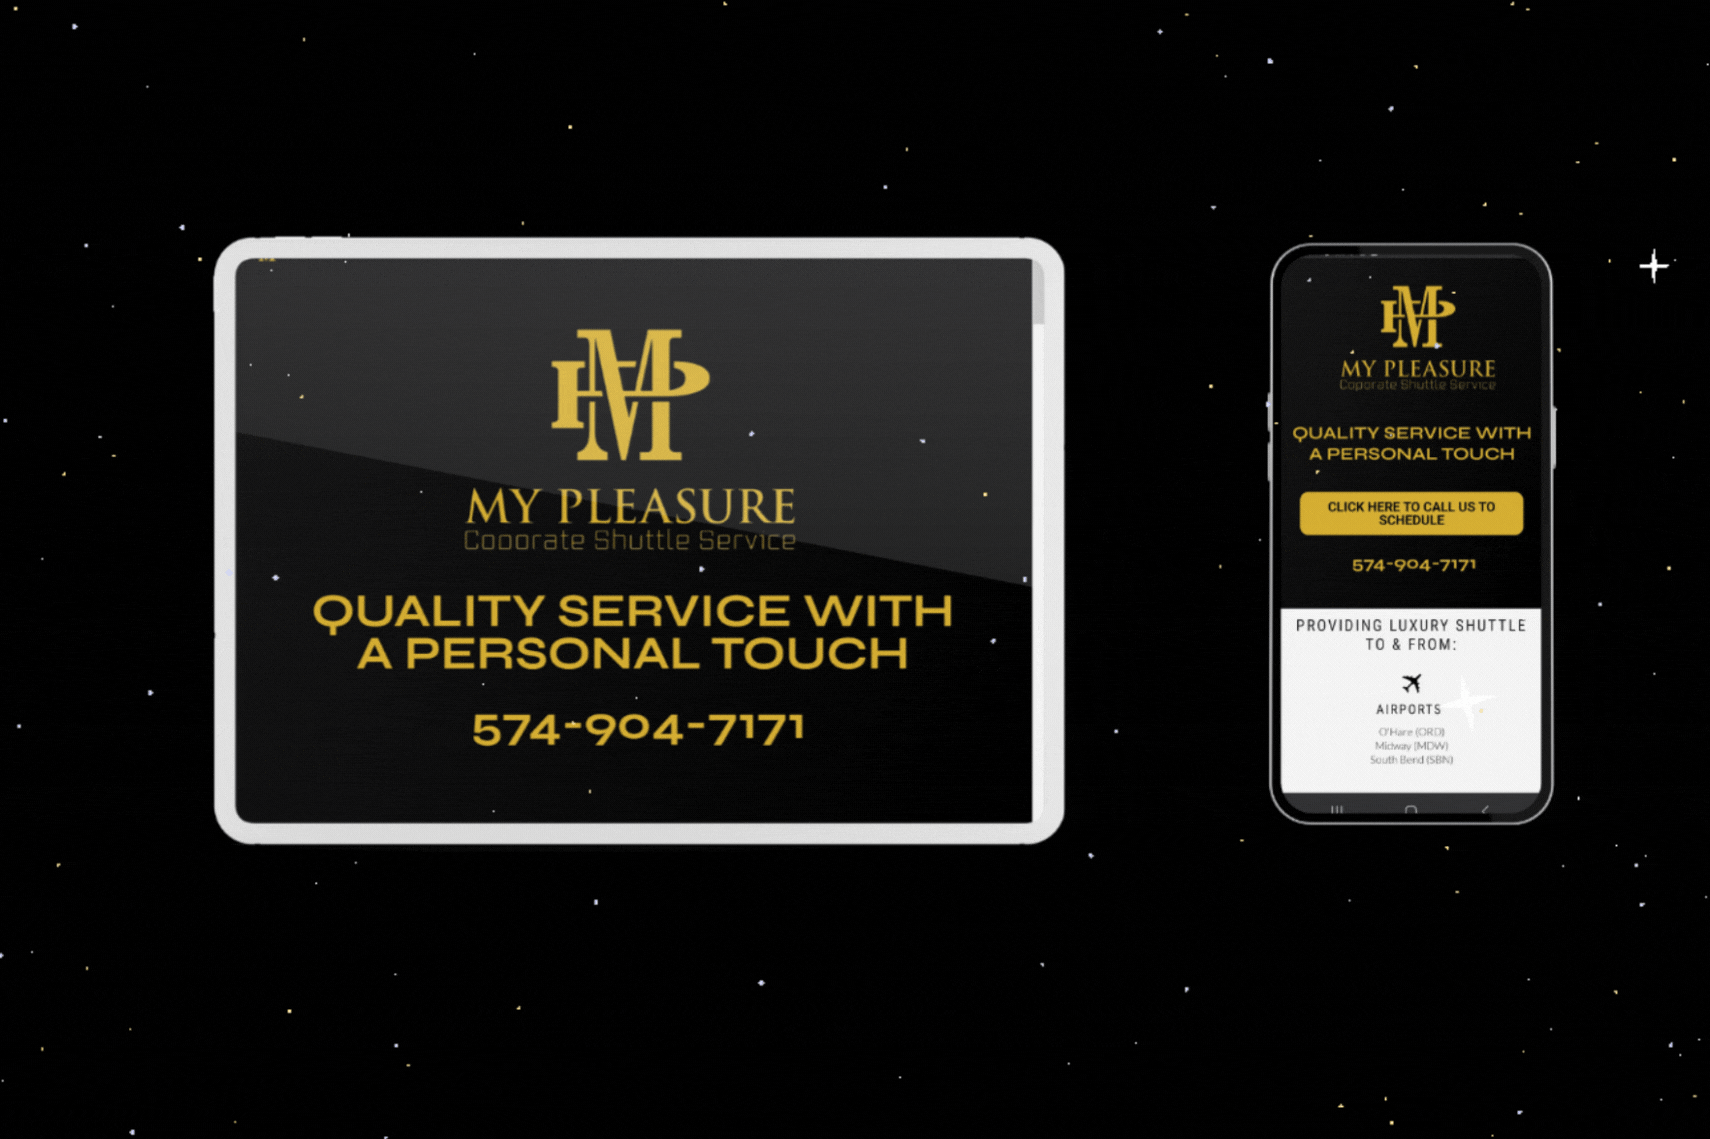 My Pleasure Corporate Shuttle Service Tablet and Mobile mockup, black background with sparkles